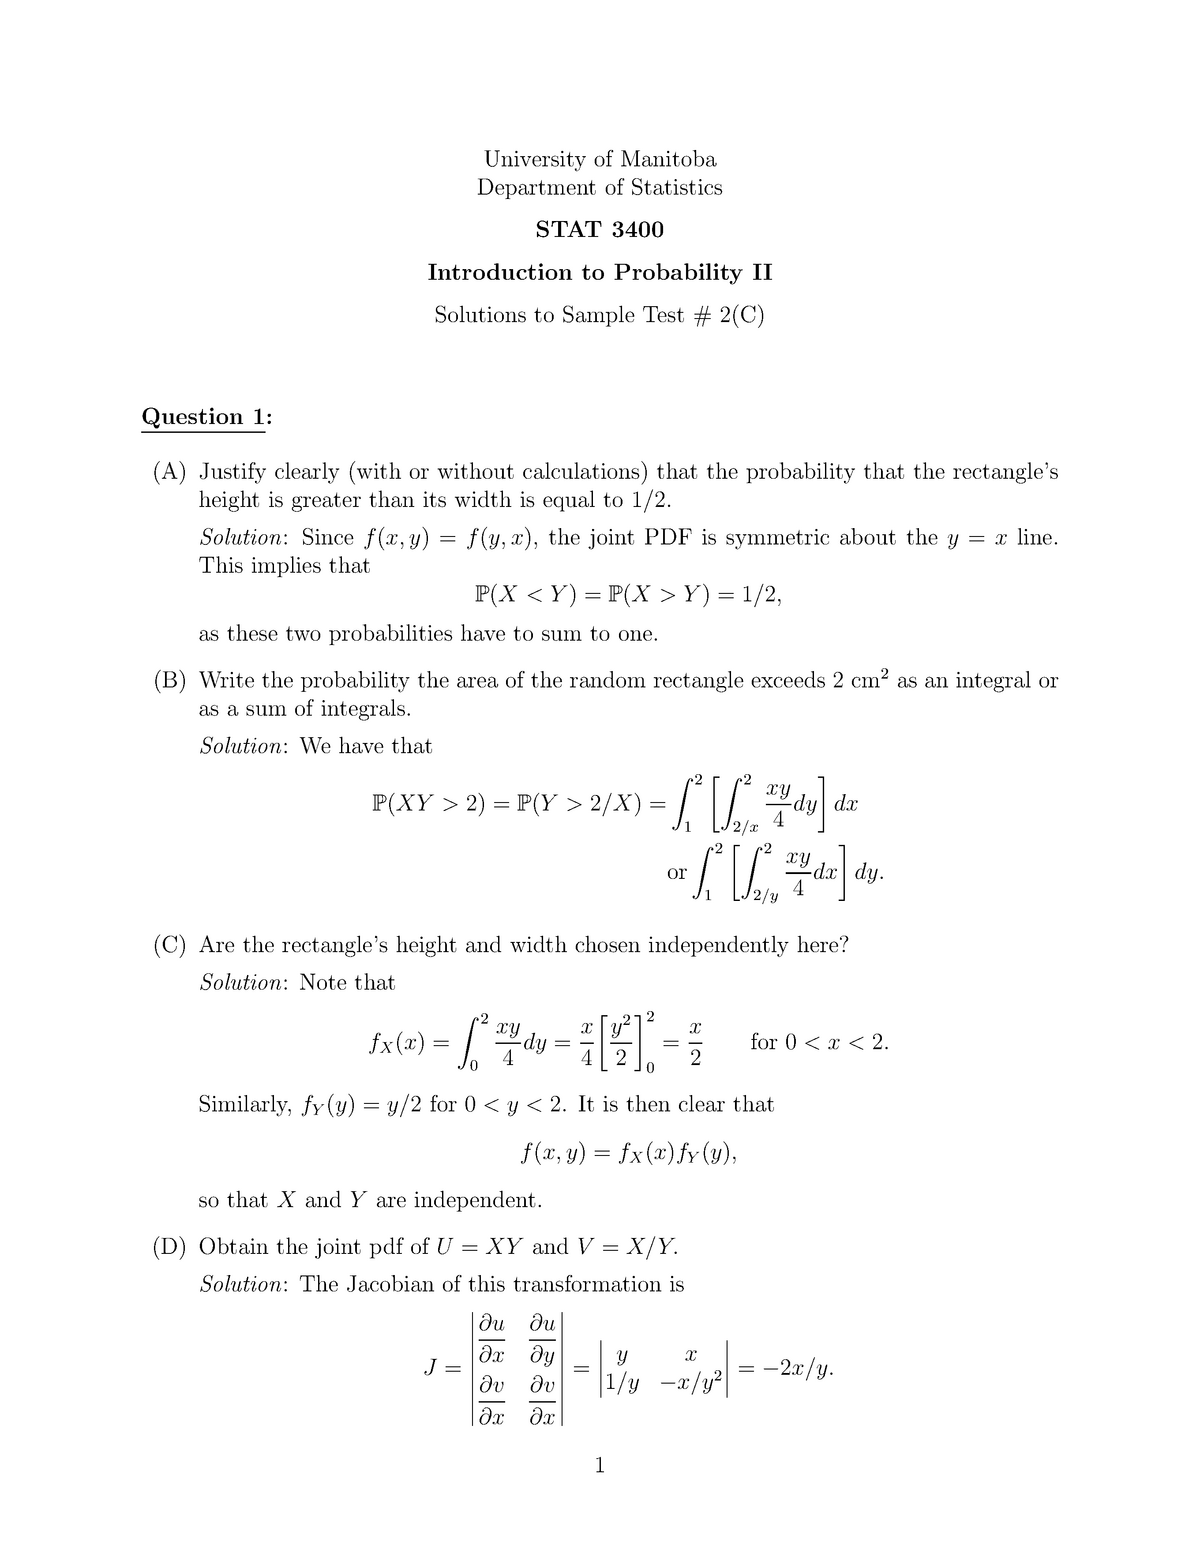 Sample Practice Exam Answers University Of Manitoba Department Of Statistics Stat 3400 Introduction To Probability Ii Solutions To Sample Test Question Justify Studocu